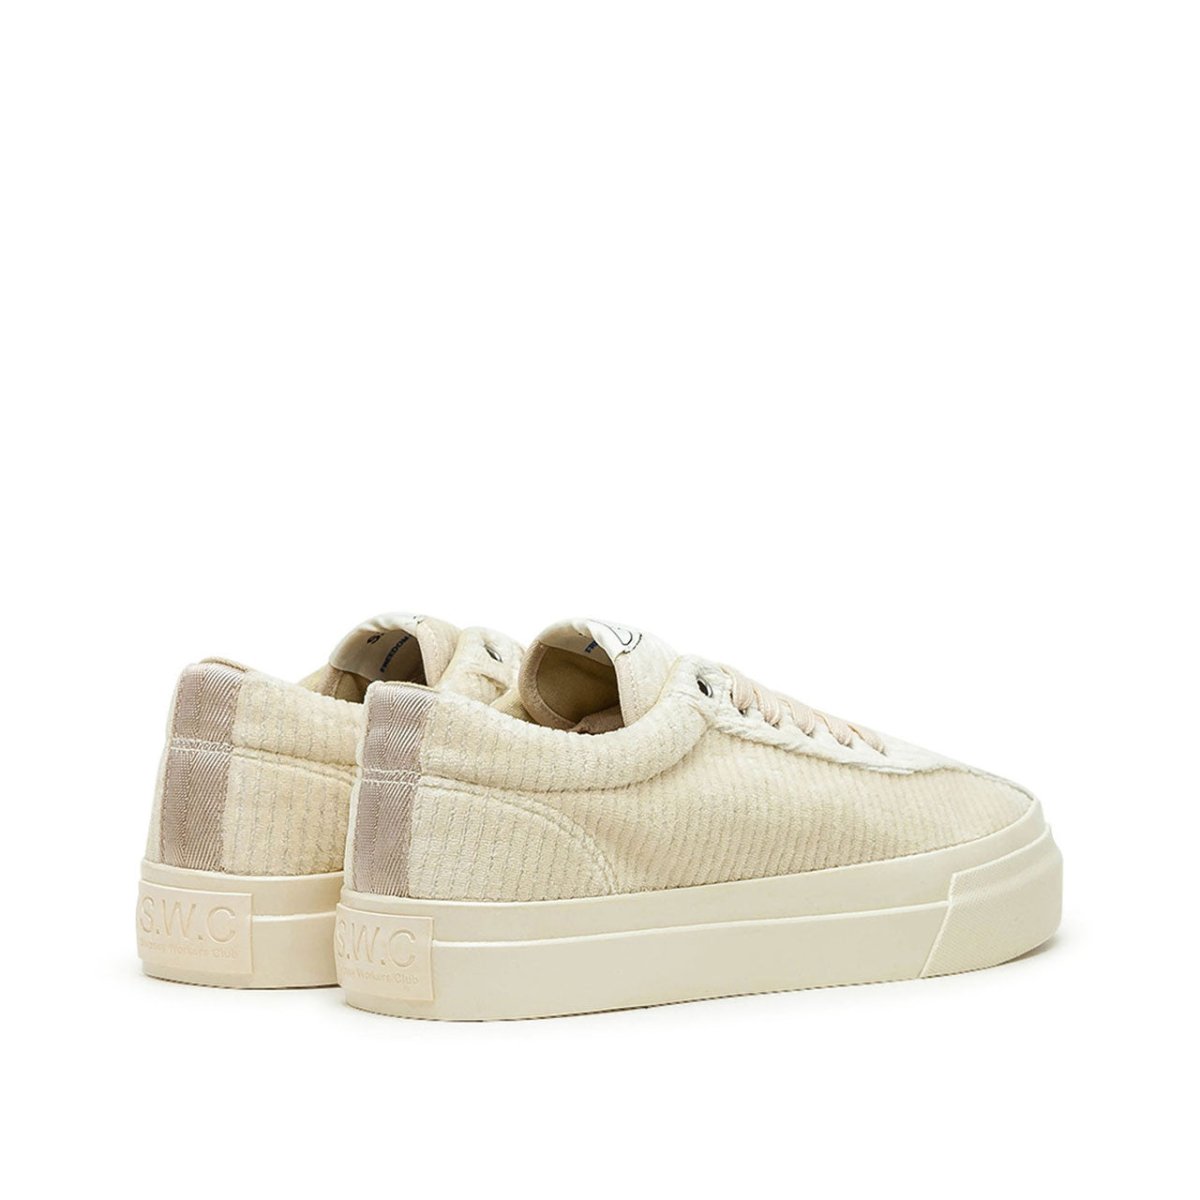 Stepney Workers Club WMNS Dellow Grand Cord (Beige)  - Allike Store